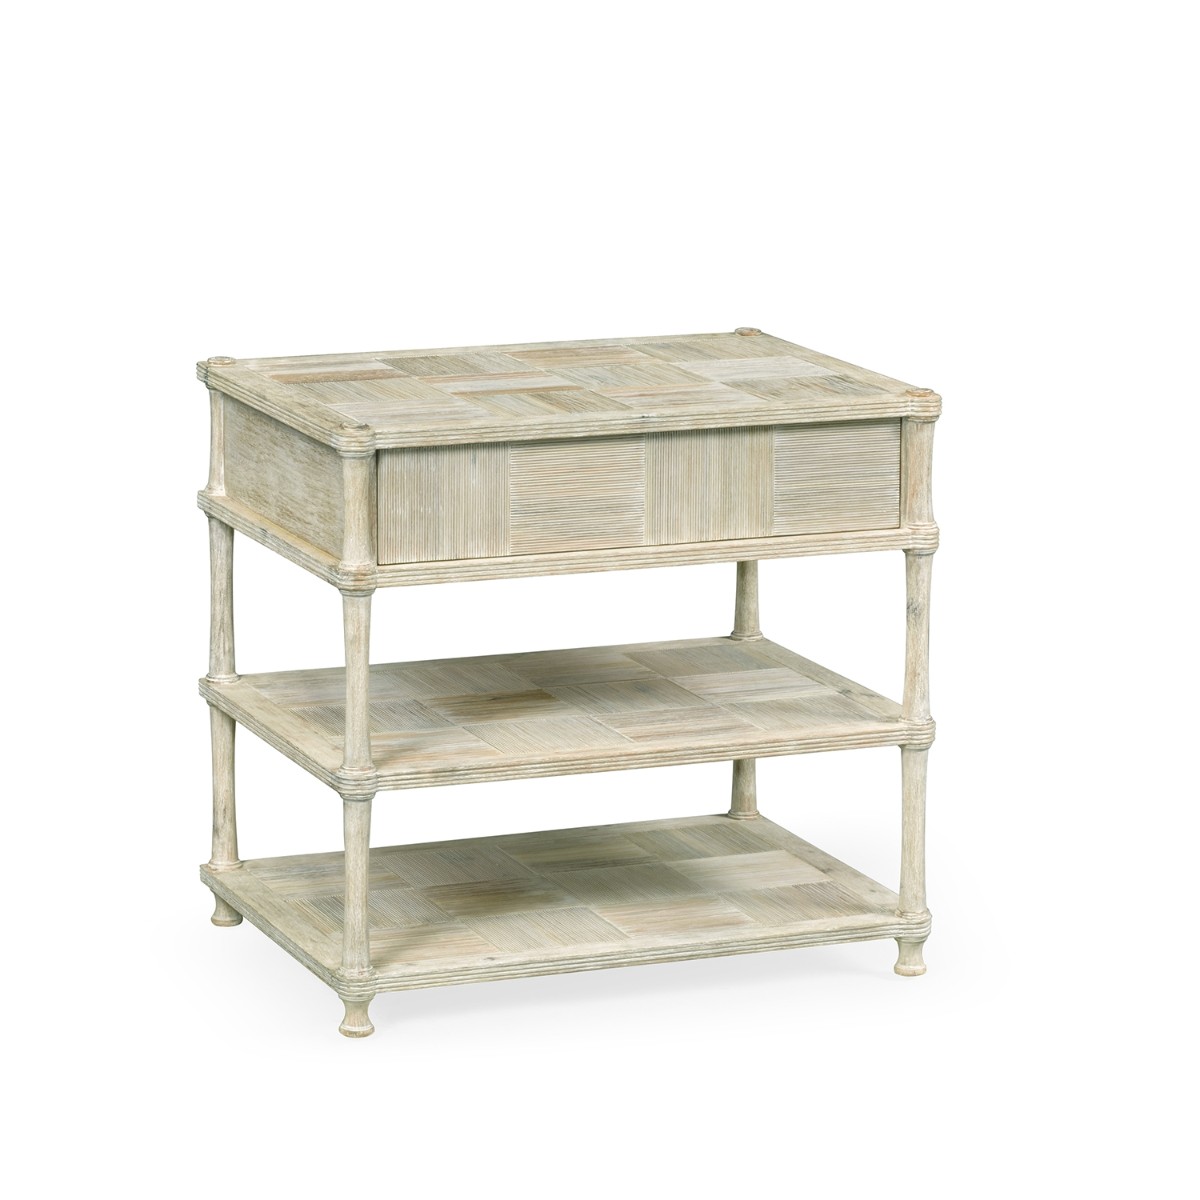 William Yeoward Bywater Side Table With Drawer Washed Acacia